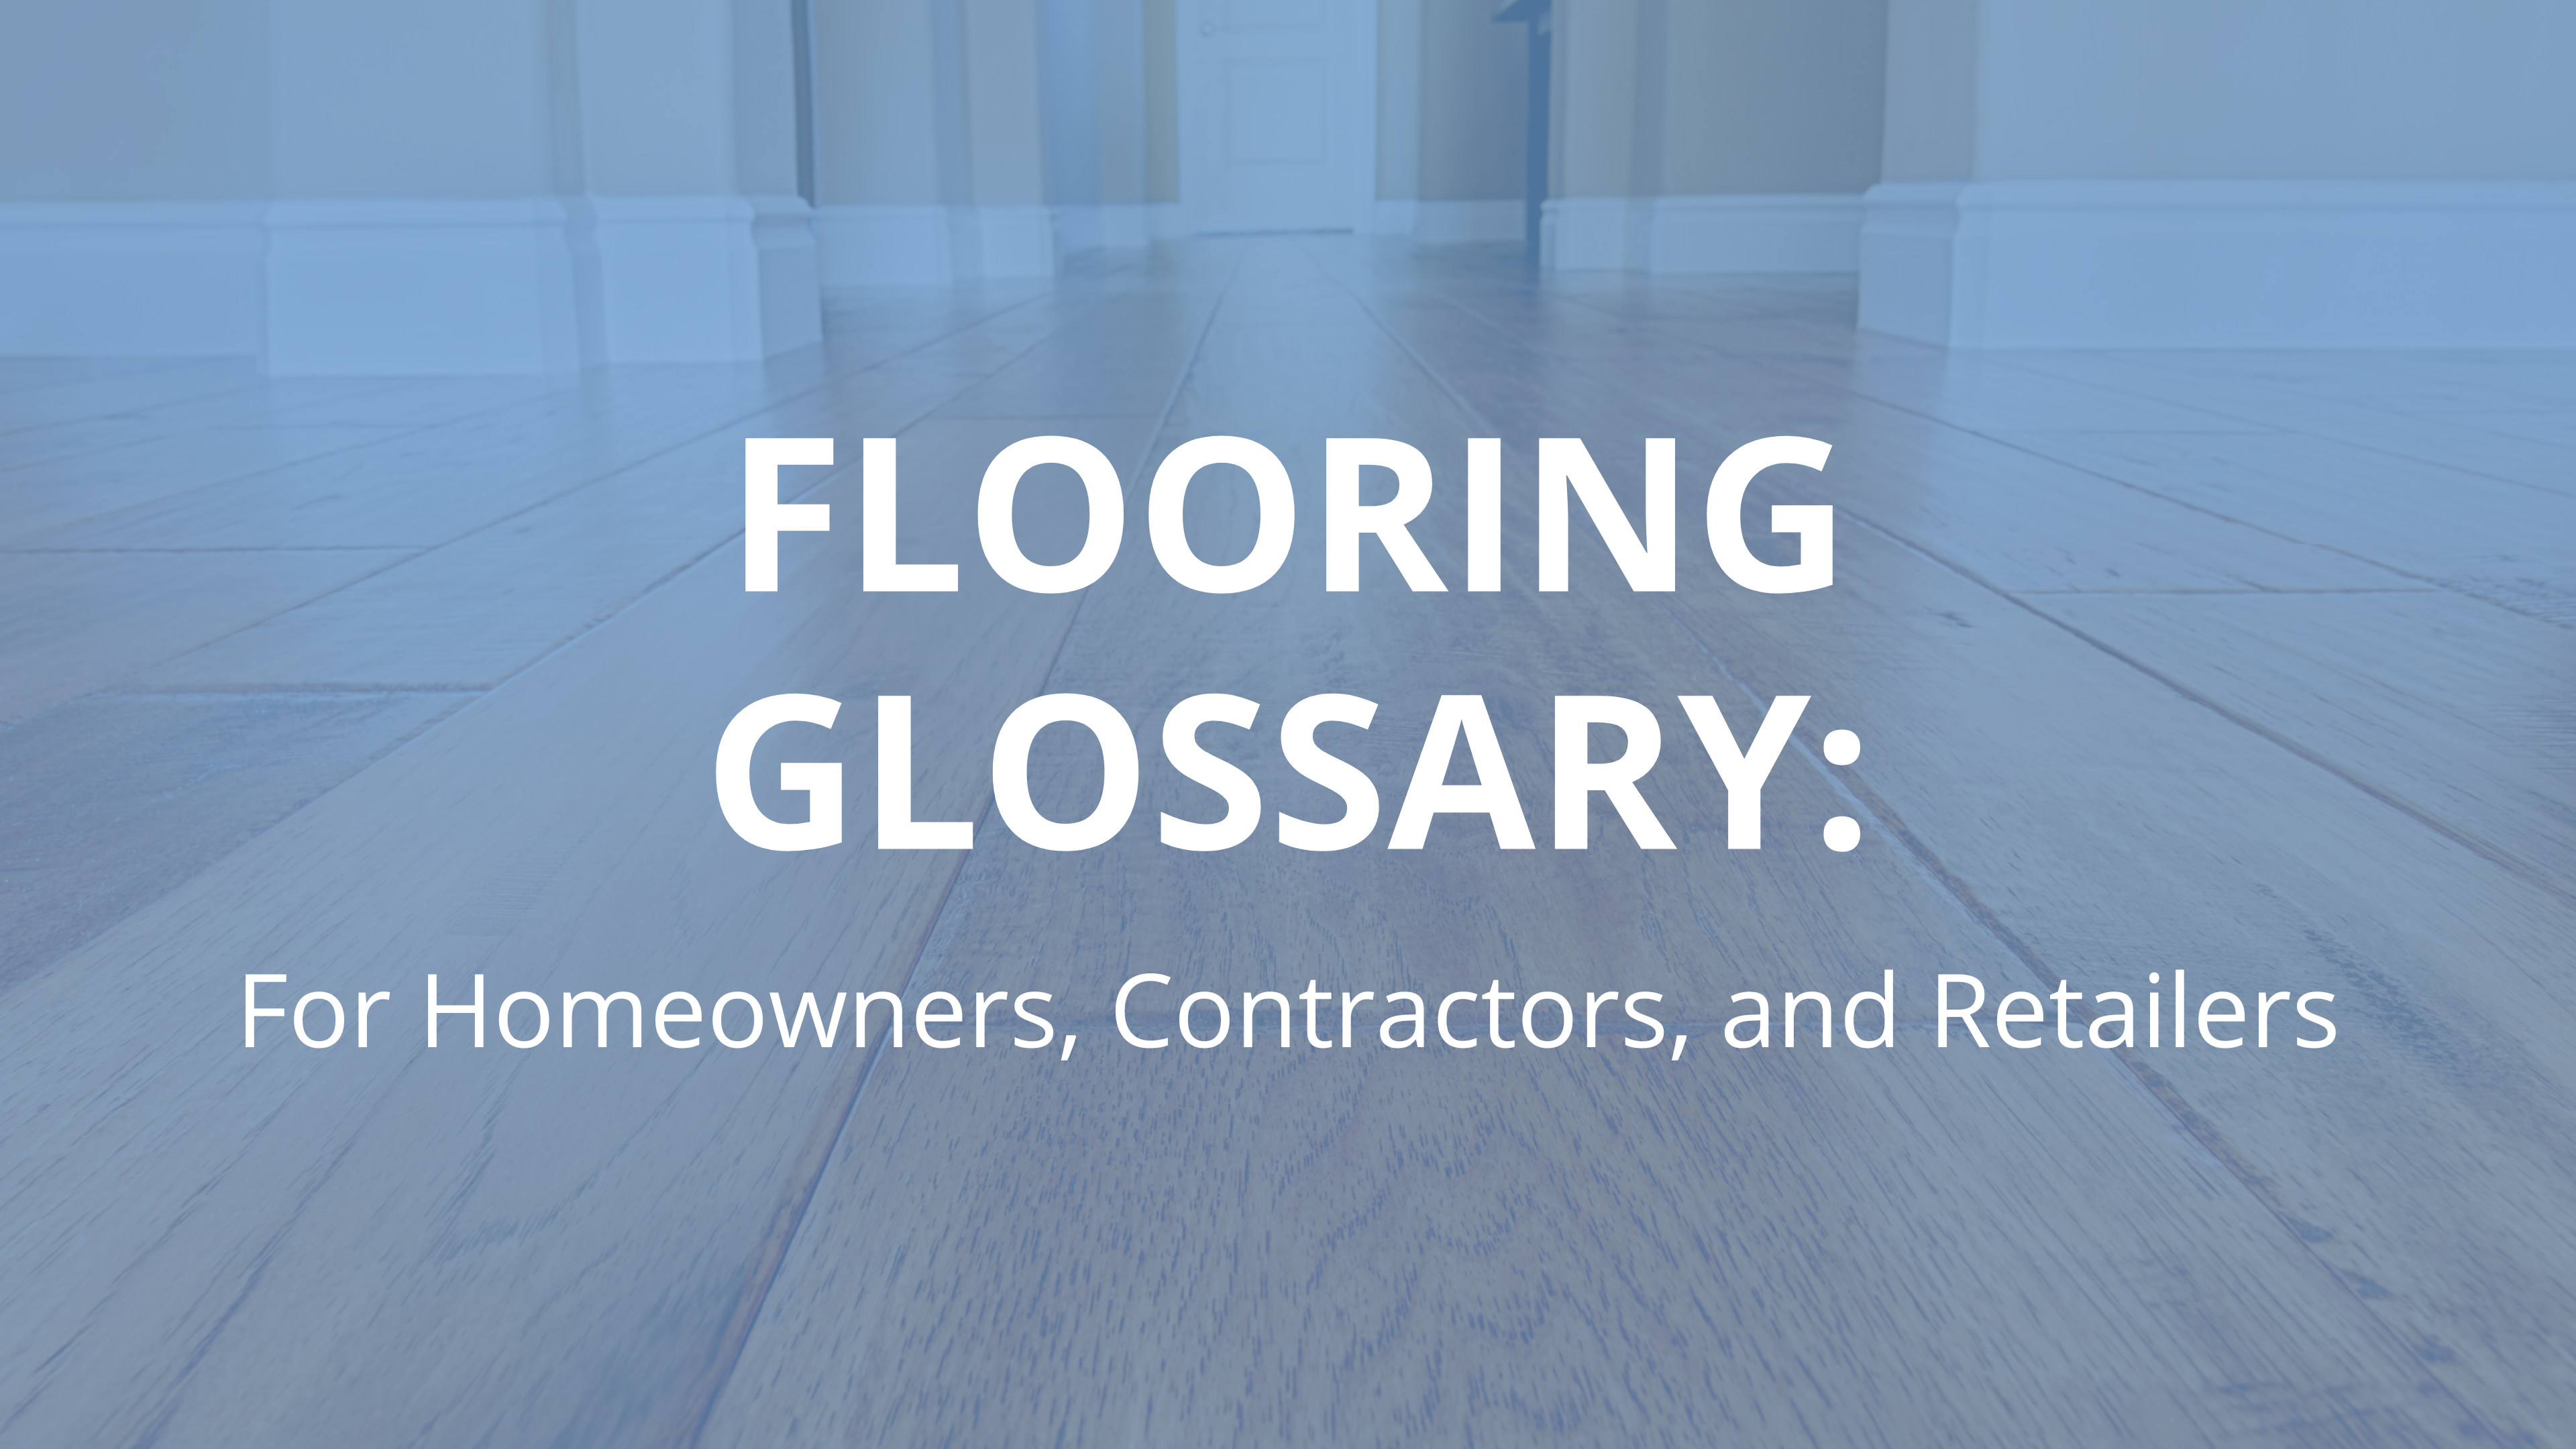 Flooring Glossary for Homeowners, Contractors & Retailers